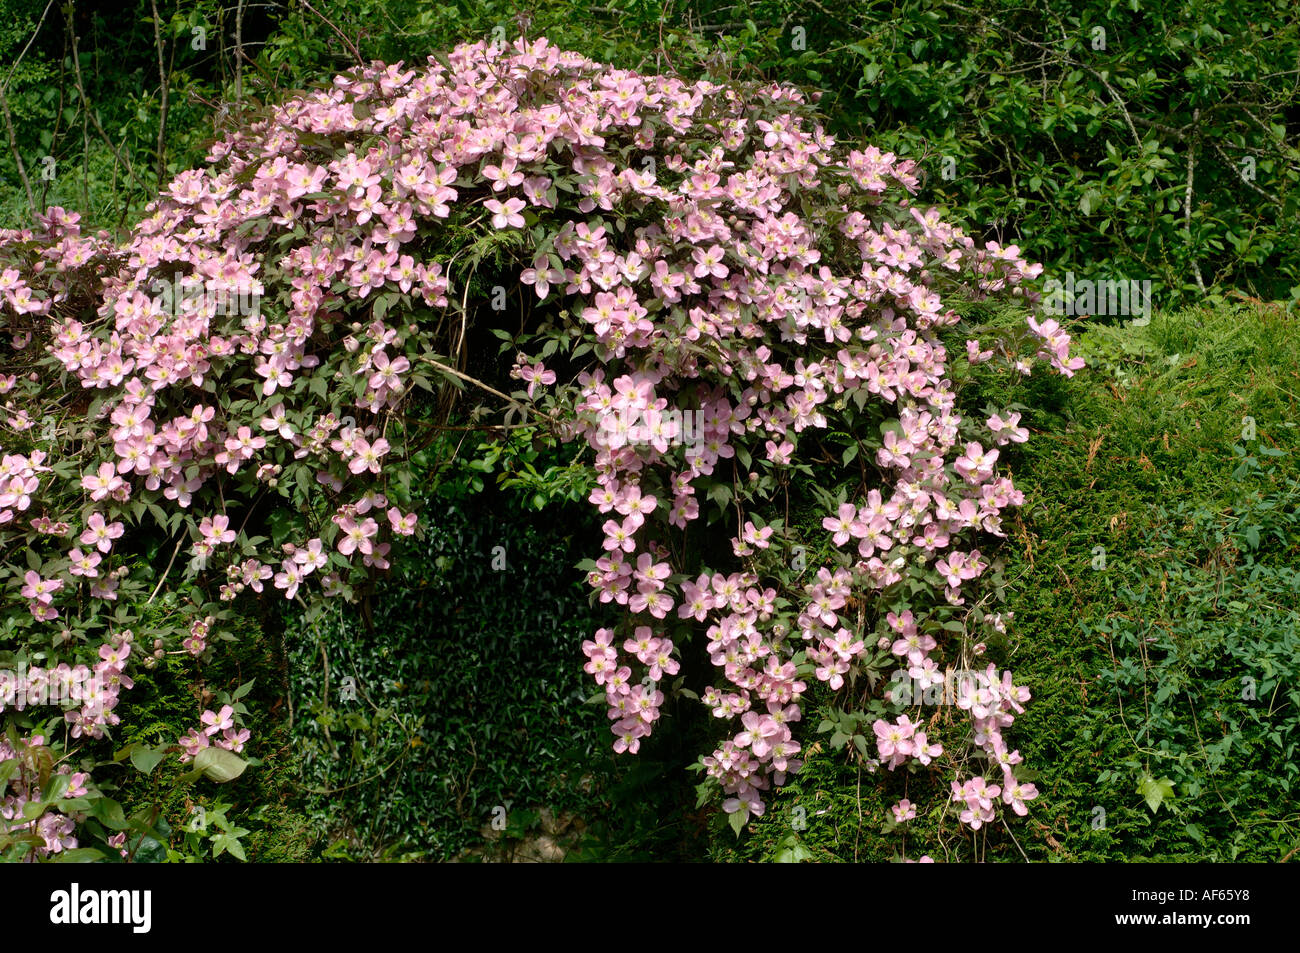 Clematis montana plant climbing over Leylandii hedge arch flowering profusely Stock Photo